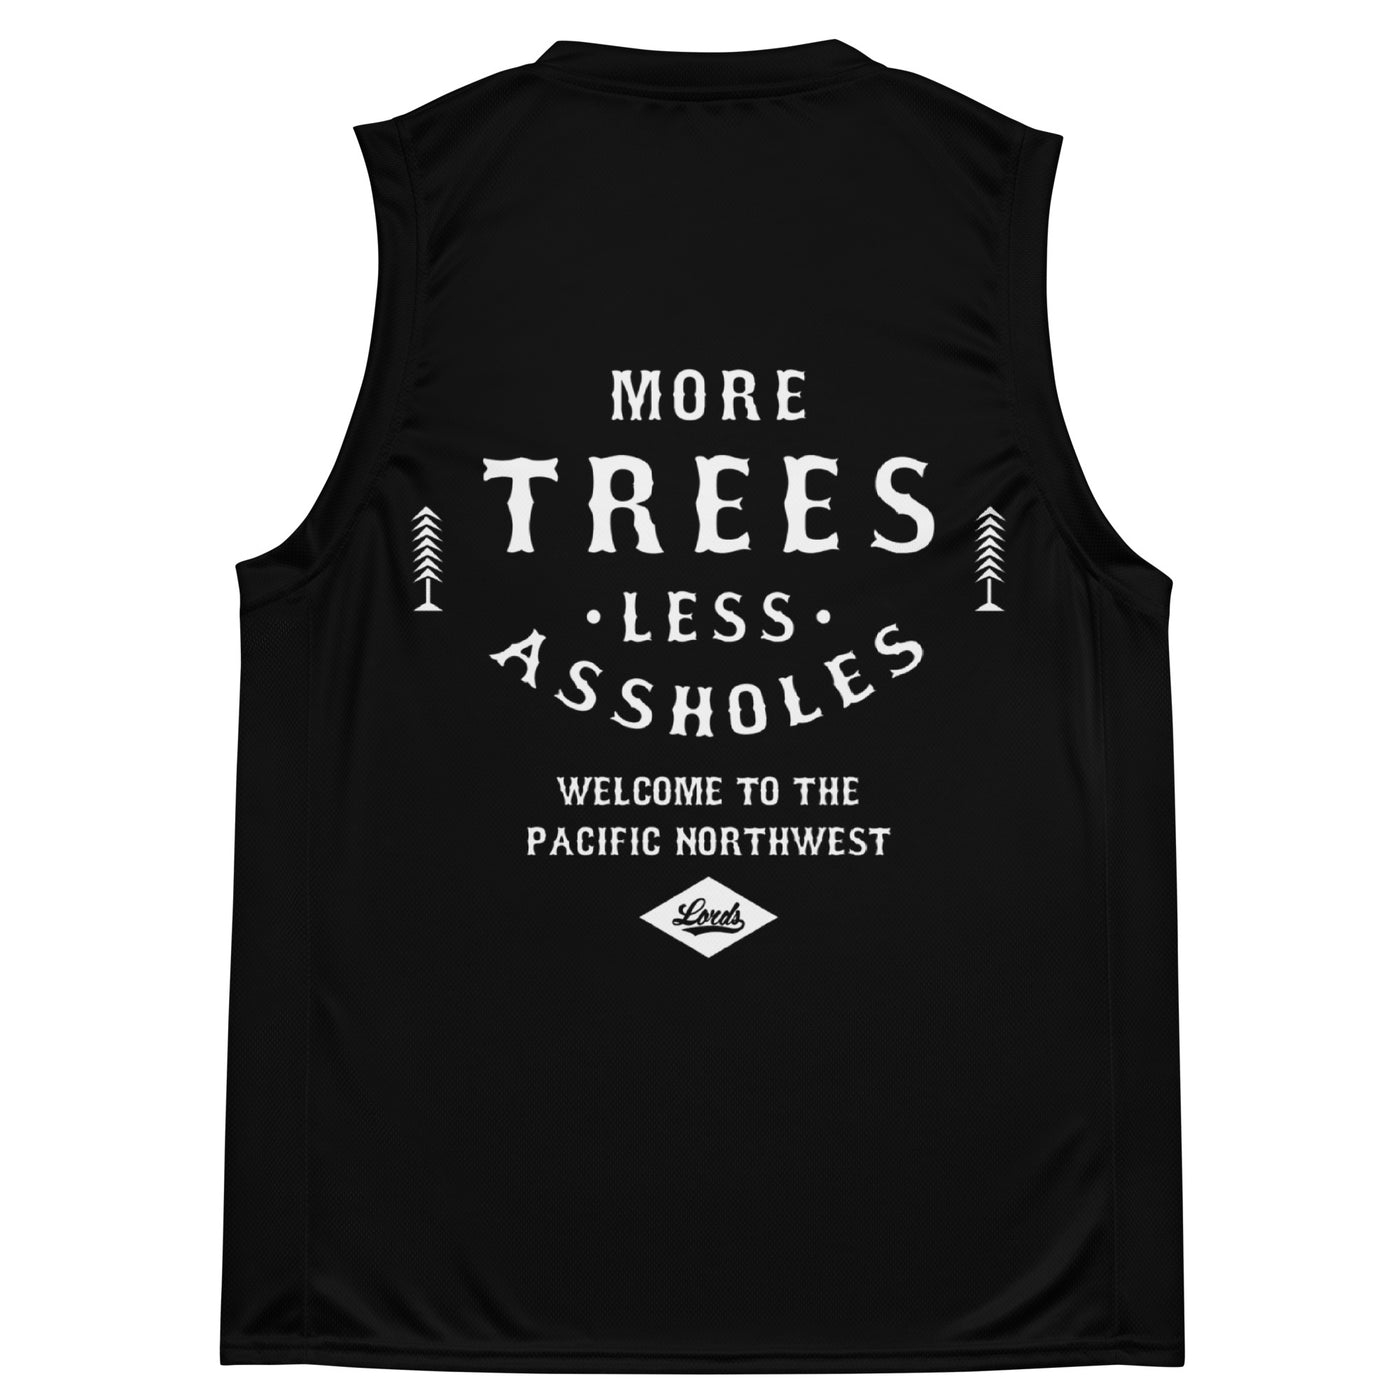 Lords x More Trees Hardwood Jersey - Black/White